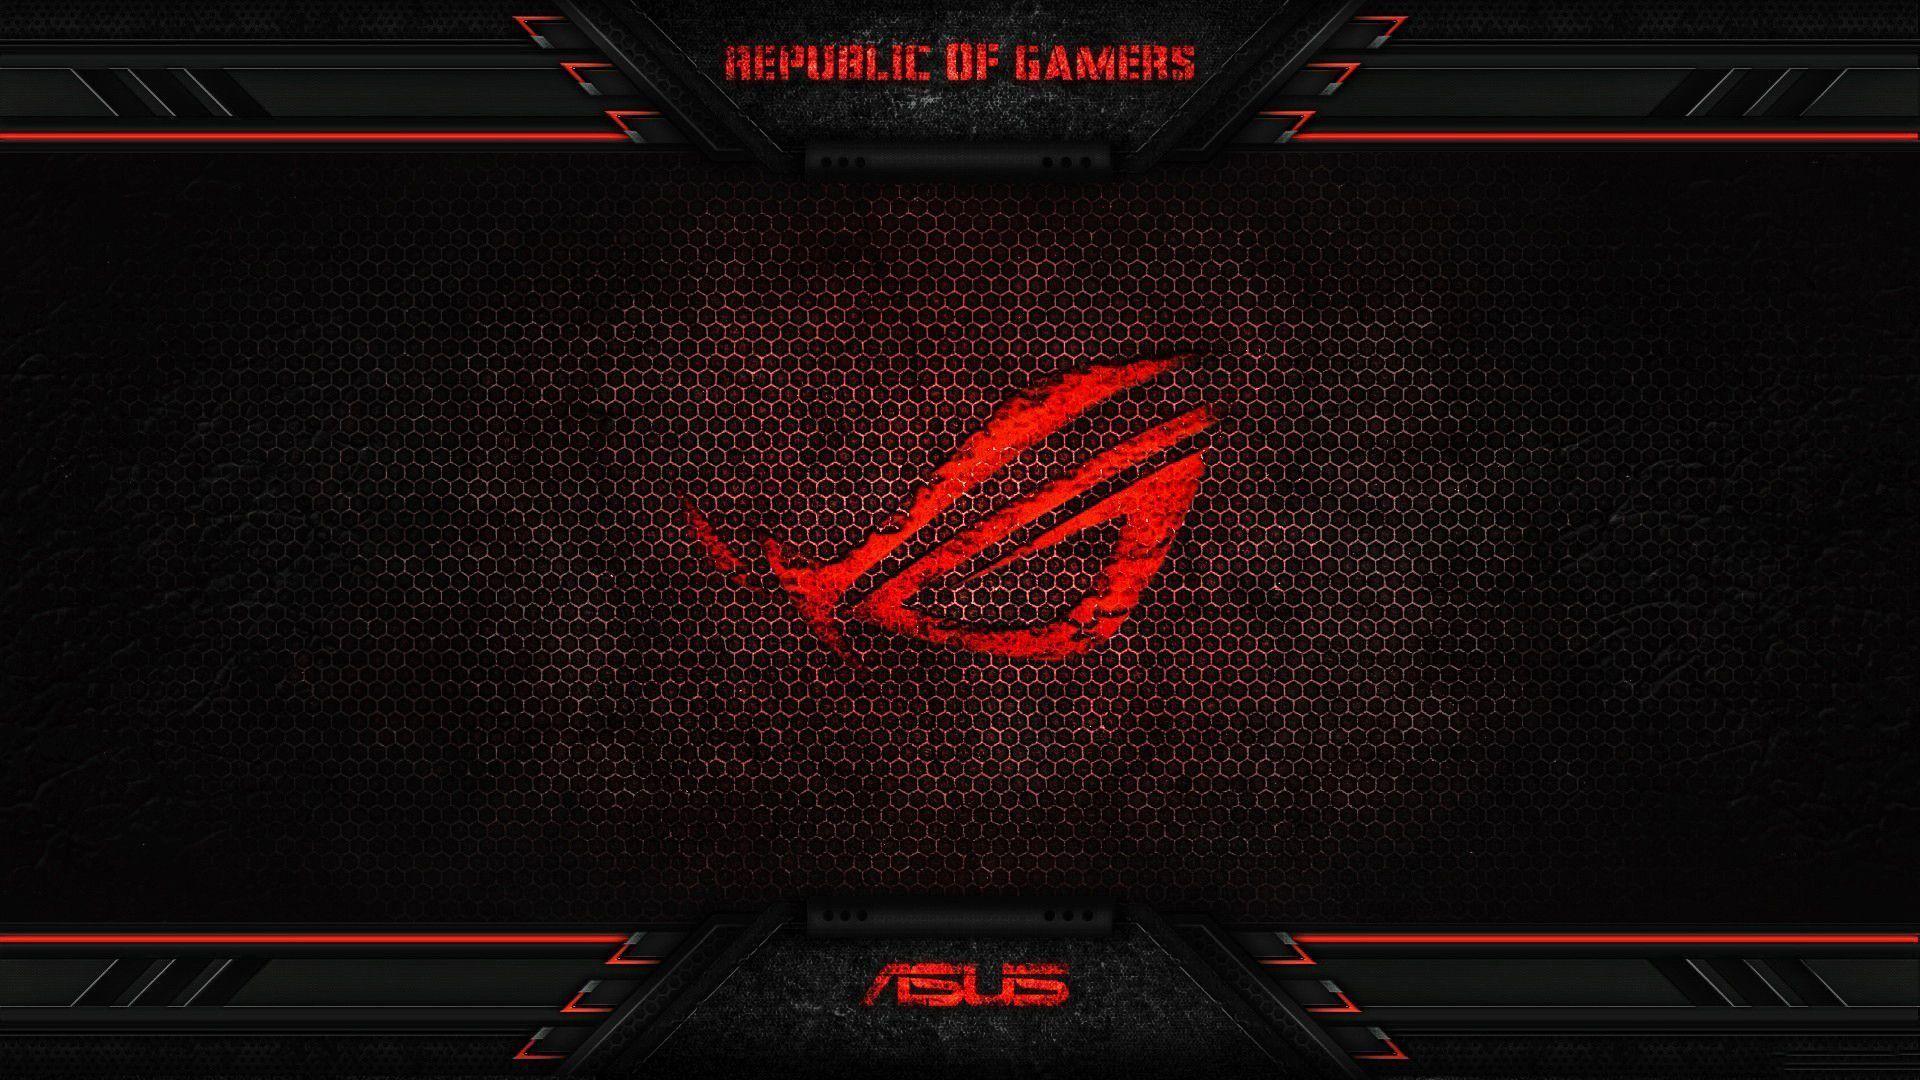 Asus Republic Of Gamers Wallpapers Wallpaper Cave 104664 Hot Sex Picture 5970